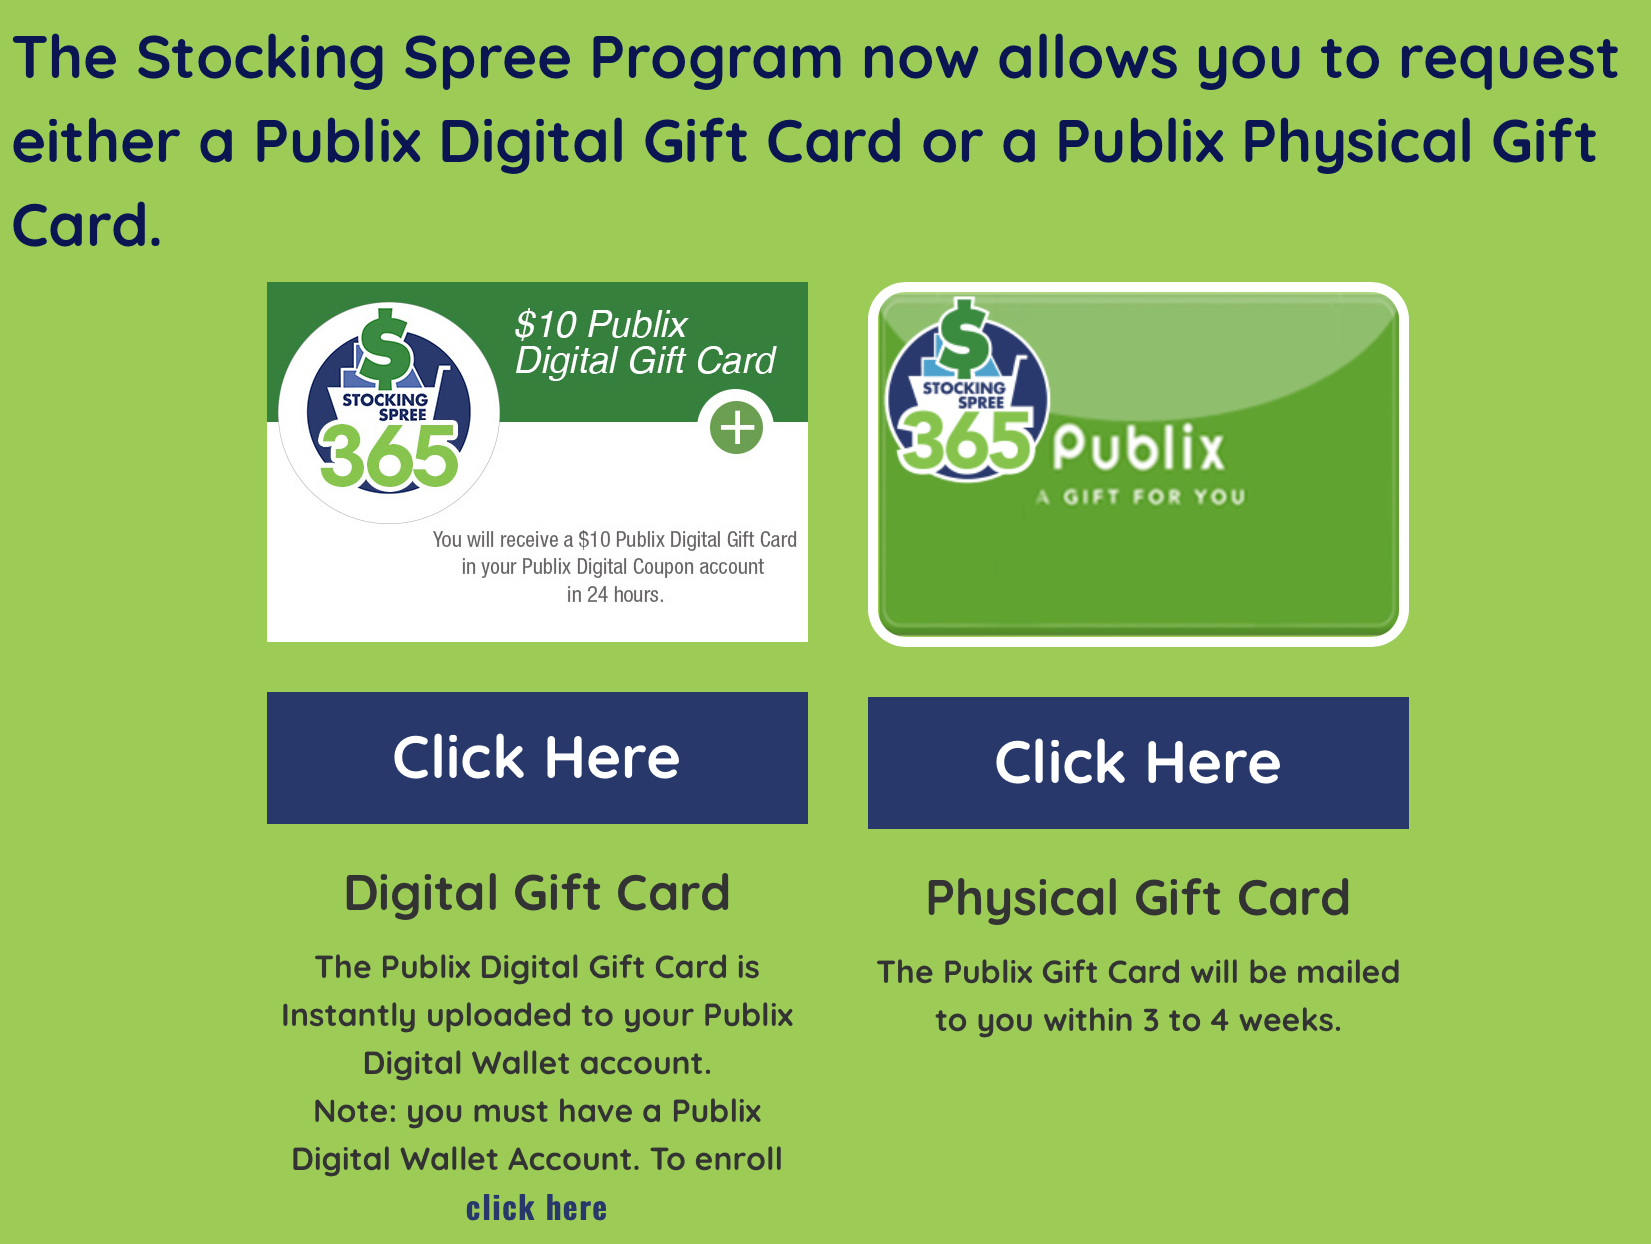 Don't Forget To Earn Up To $120 In Publix Gift Cards With The Stocking Spree 365 Program - Plus 5 Winners Get $50 Publix Gift Cards on I Heart Publix 1